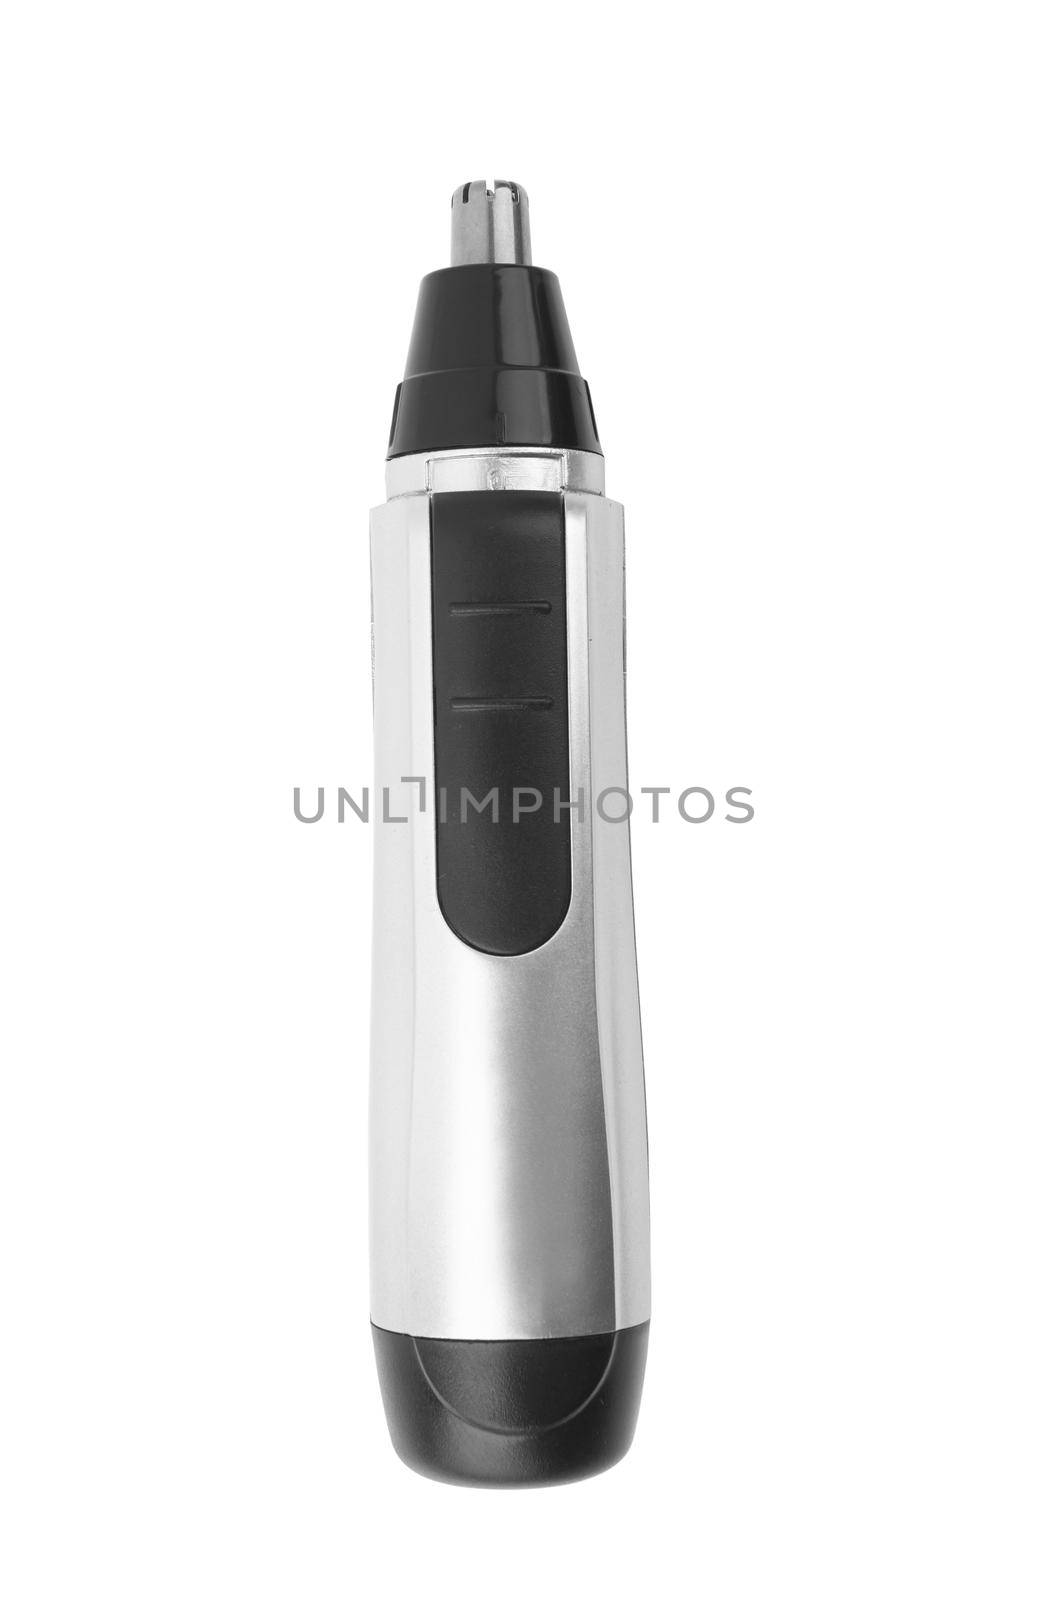 Hair trimmer isolated by pioneer111